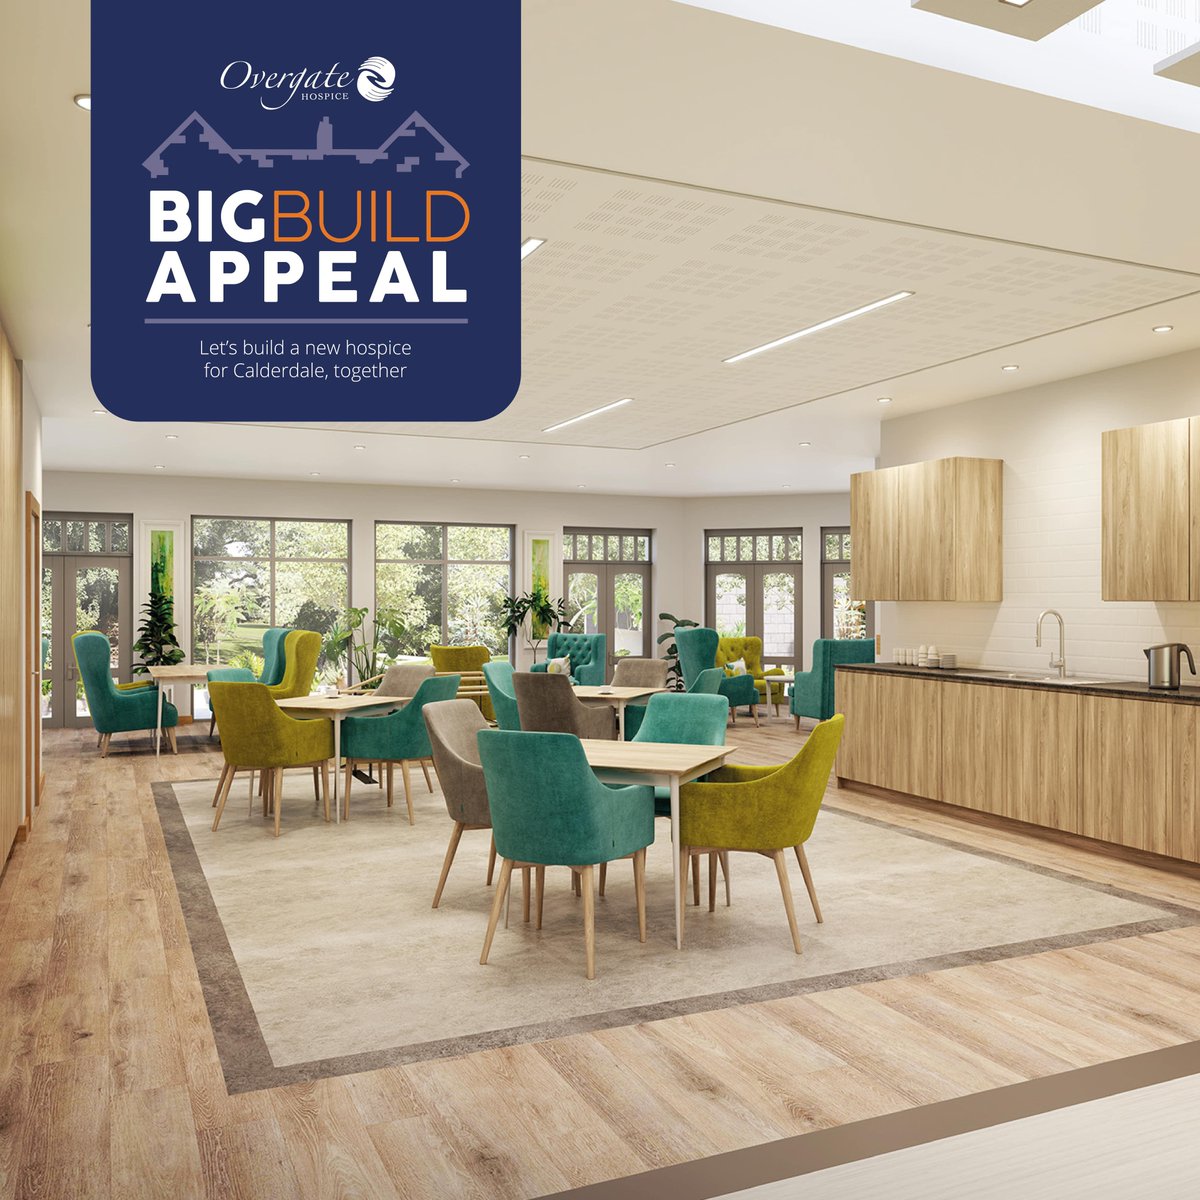 With the relocation of our Inpatient Unit, we're moving our Day Hospice to a larger, newly refurbished area. This means more space for outpatient services and therapeutic activities, like music and art therapy, for our community. buff.ly/4d2sDX2 #OvergateBigBuildAppeal